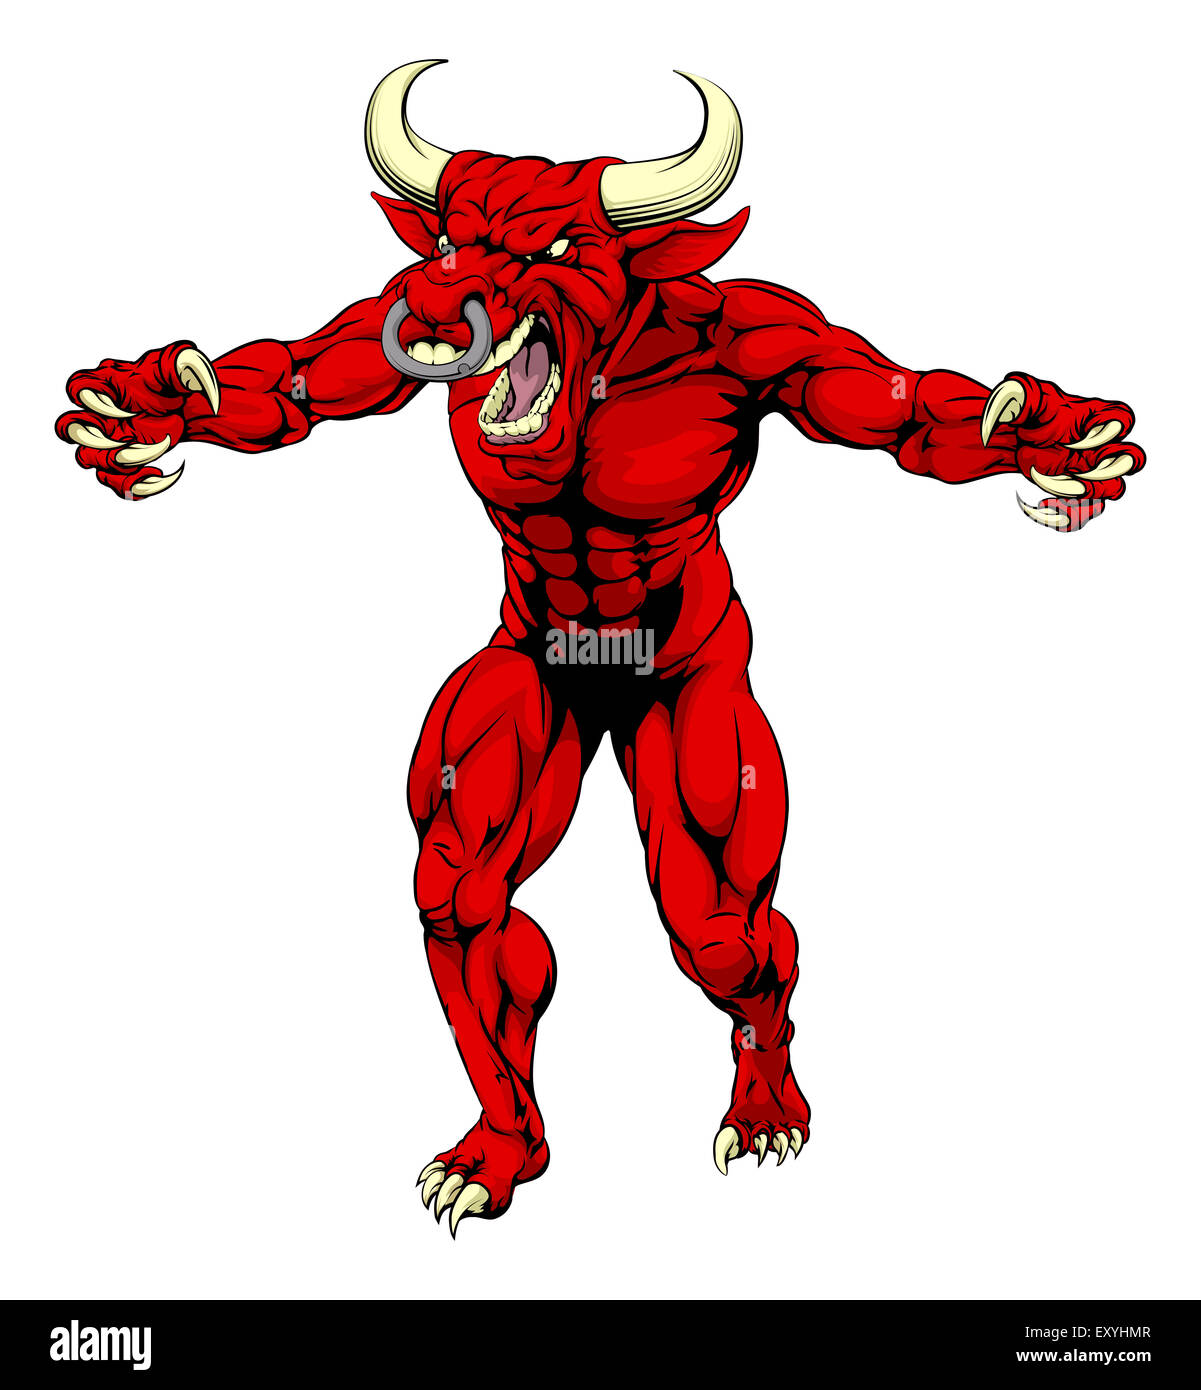 An aggressive tough mean red bull sports mascot character with claws out  Stock Photo - Alamy